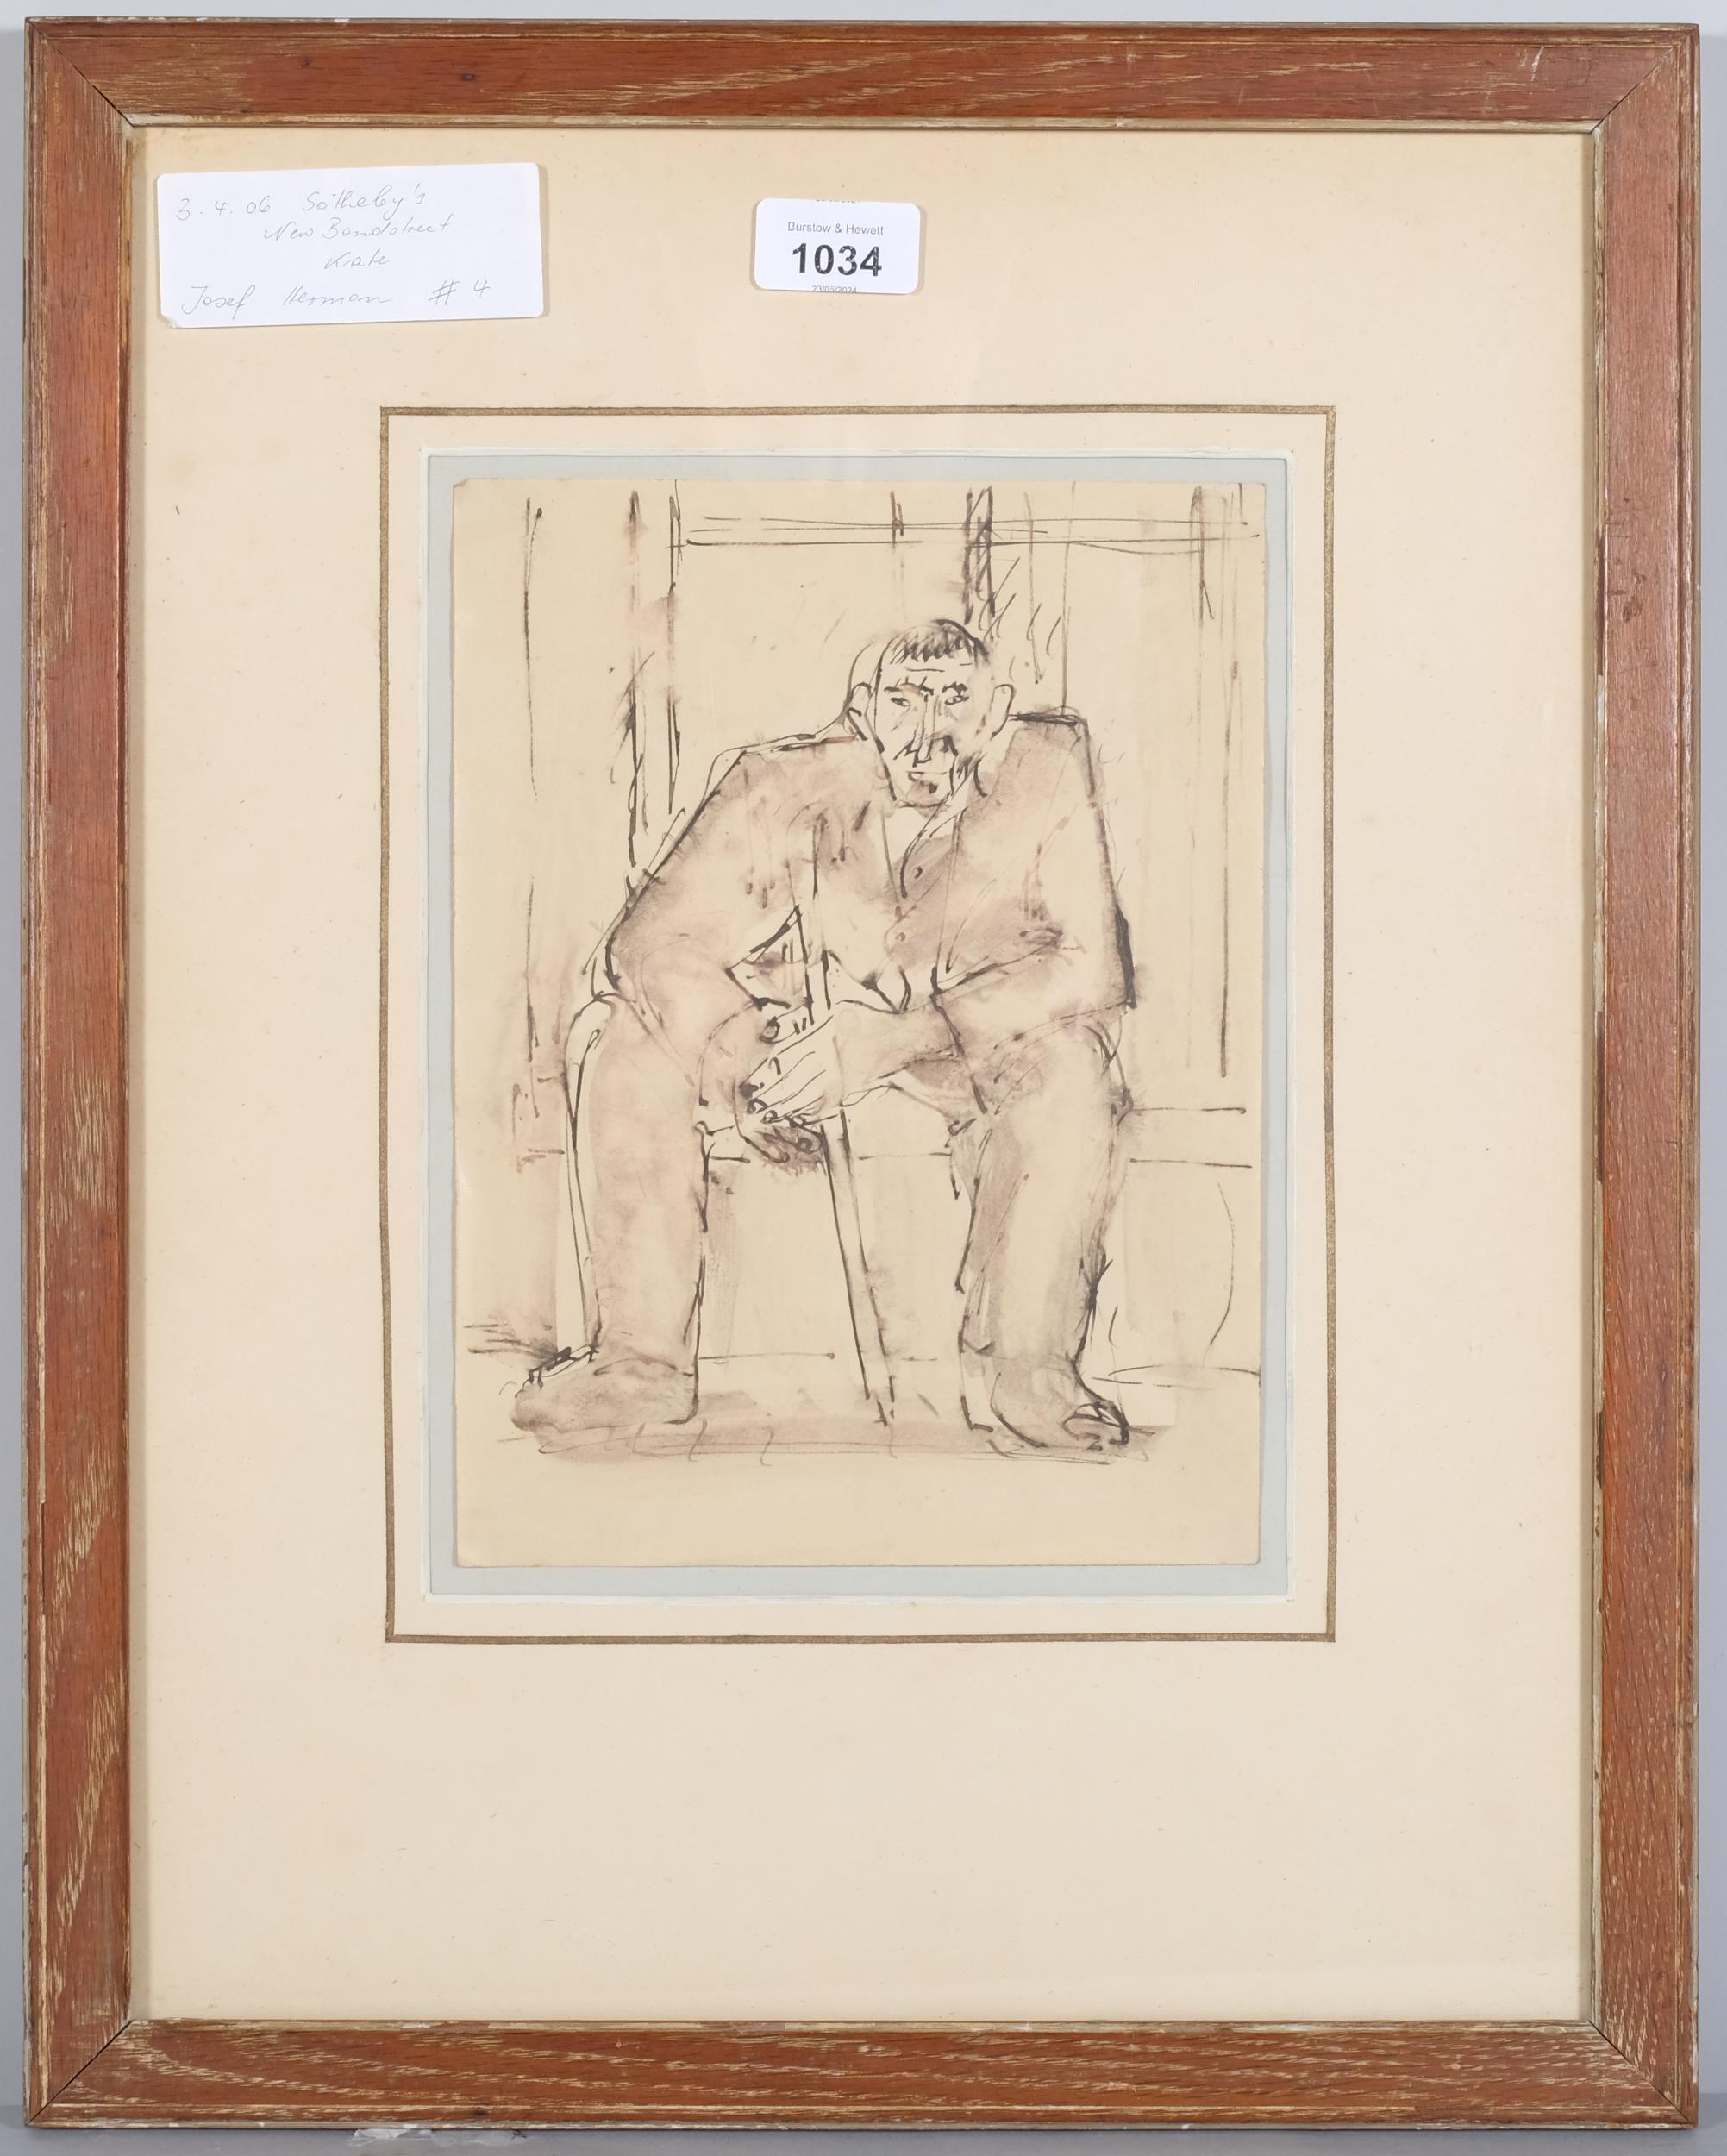 Attributed Josef Herman (1911 - 2000), seated man, ink and wash, 25cm x 19cm, framed - Image 2 of 4